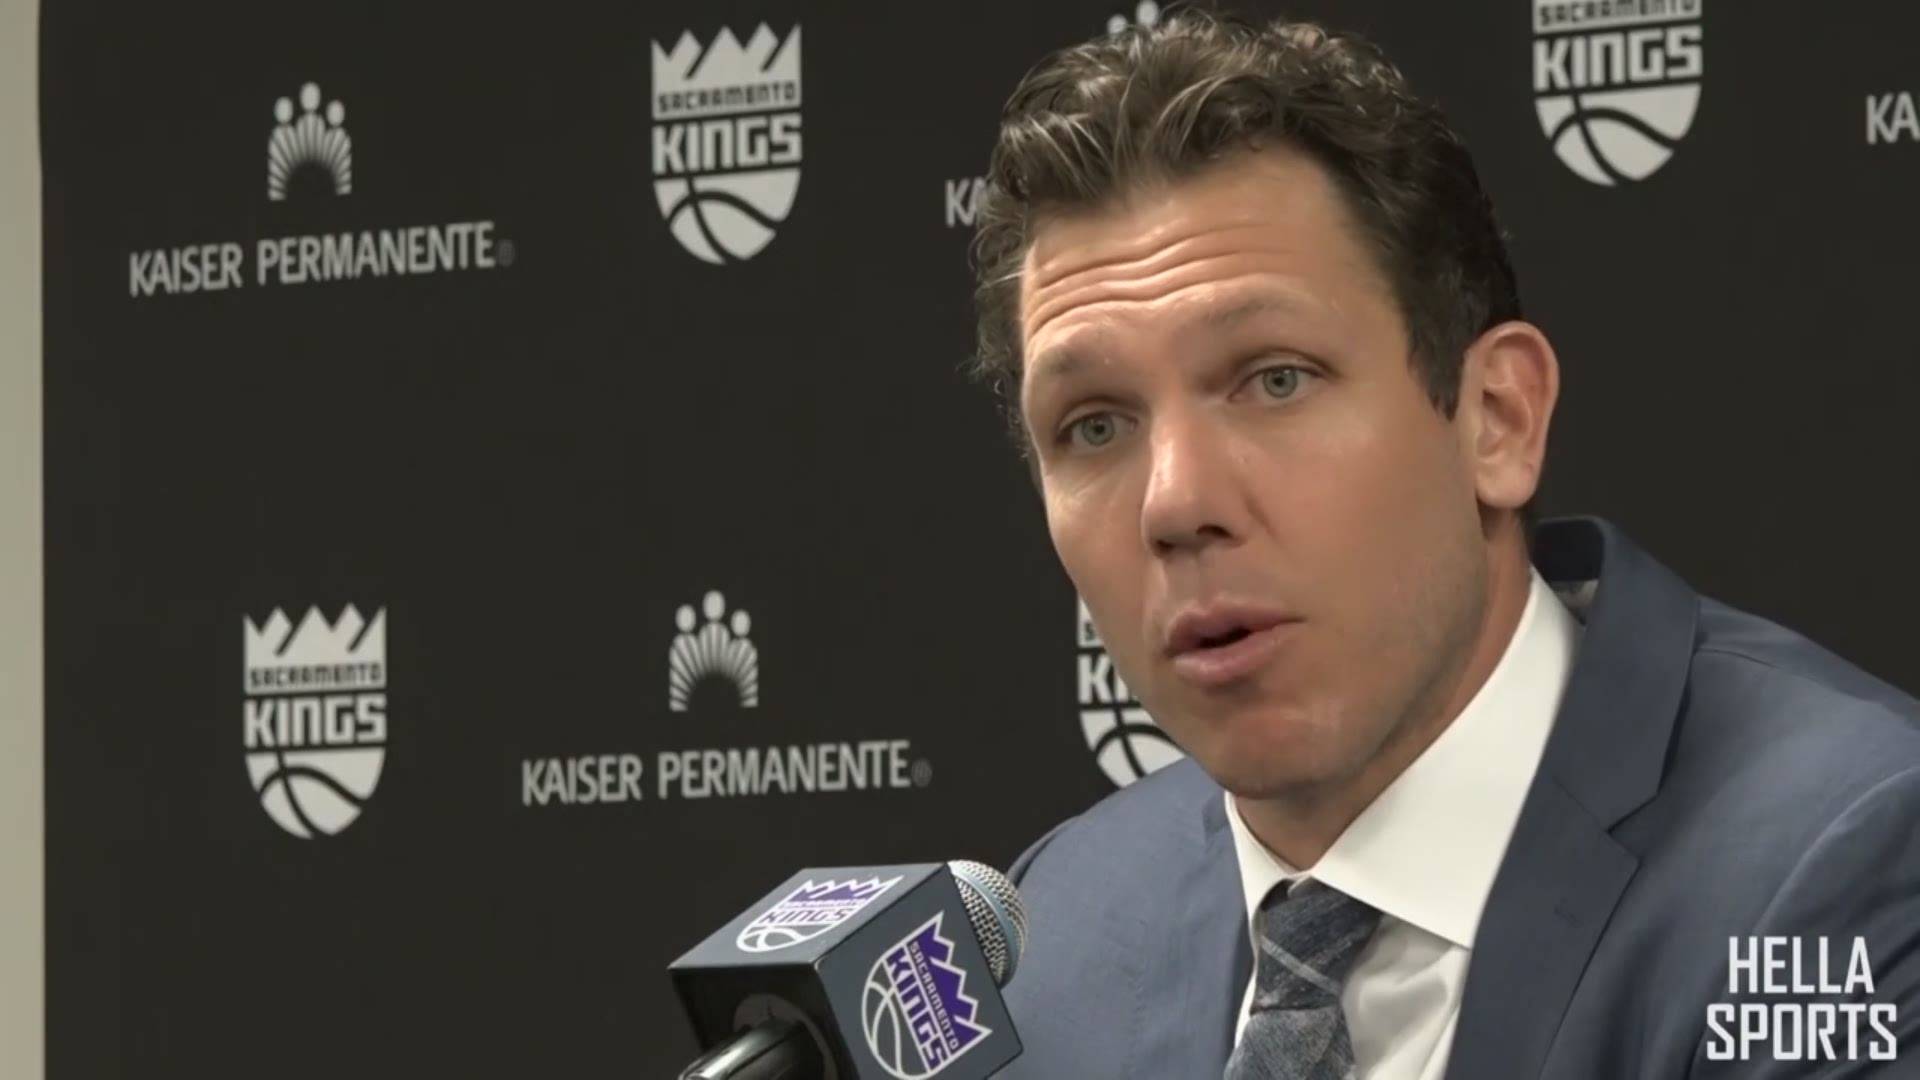 Sacramento Kings coach Luke Walton talks about returning from the All-Star break with the right energy and effort, as his team edged the Memphis Grizzlies 129-125.